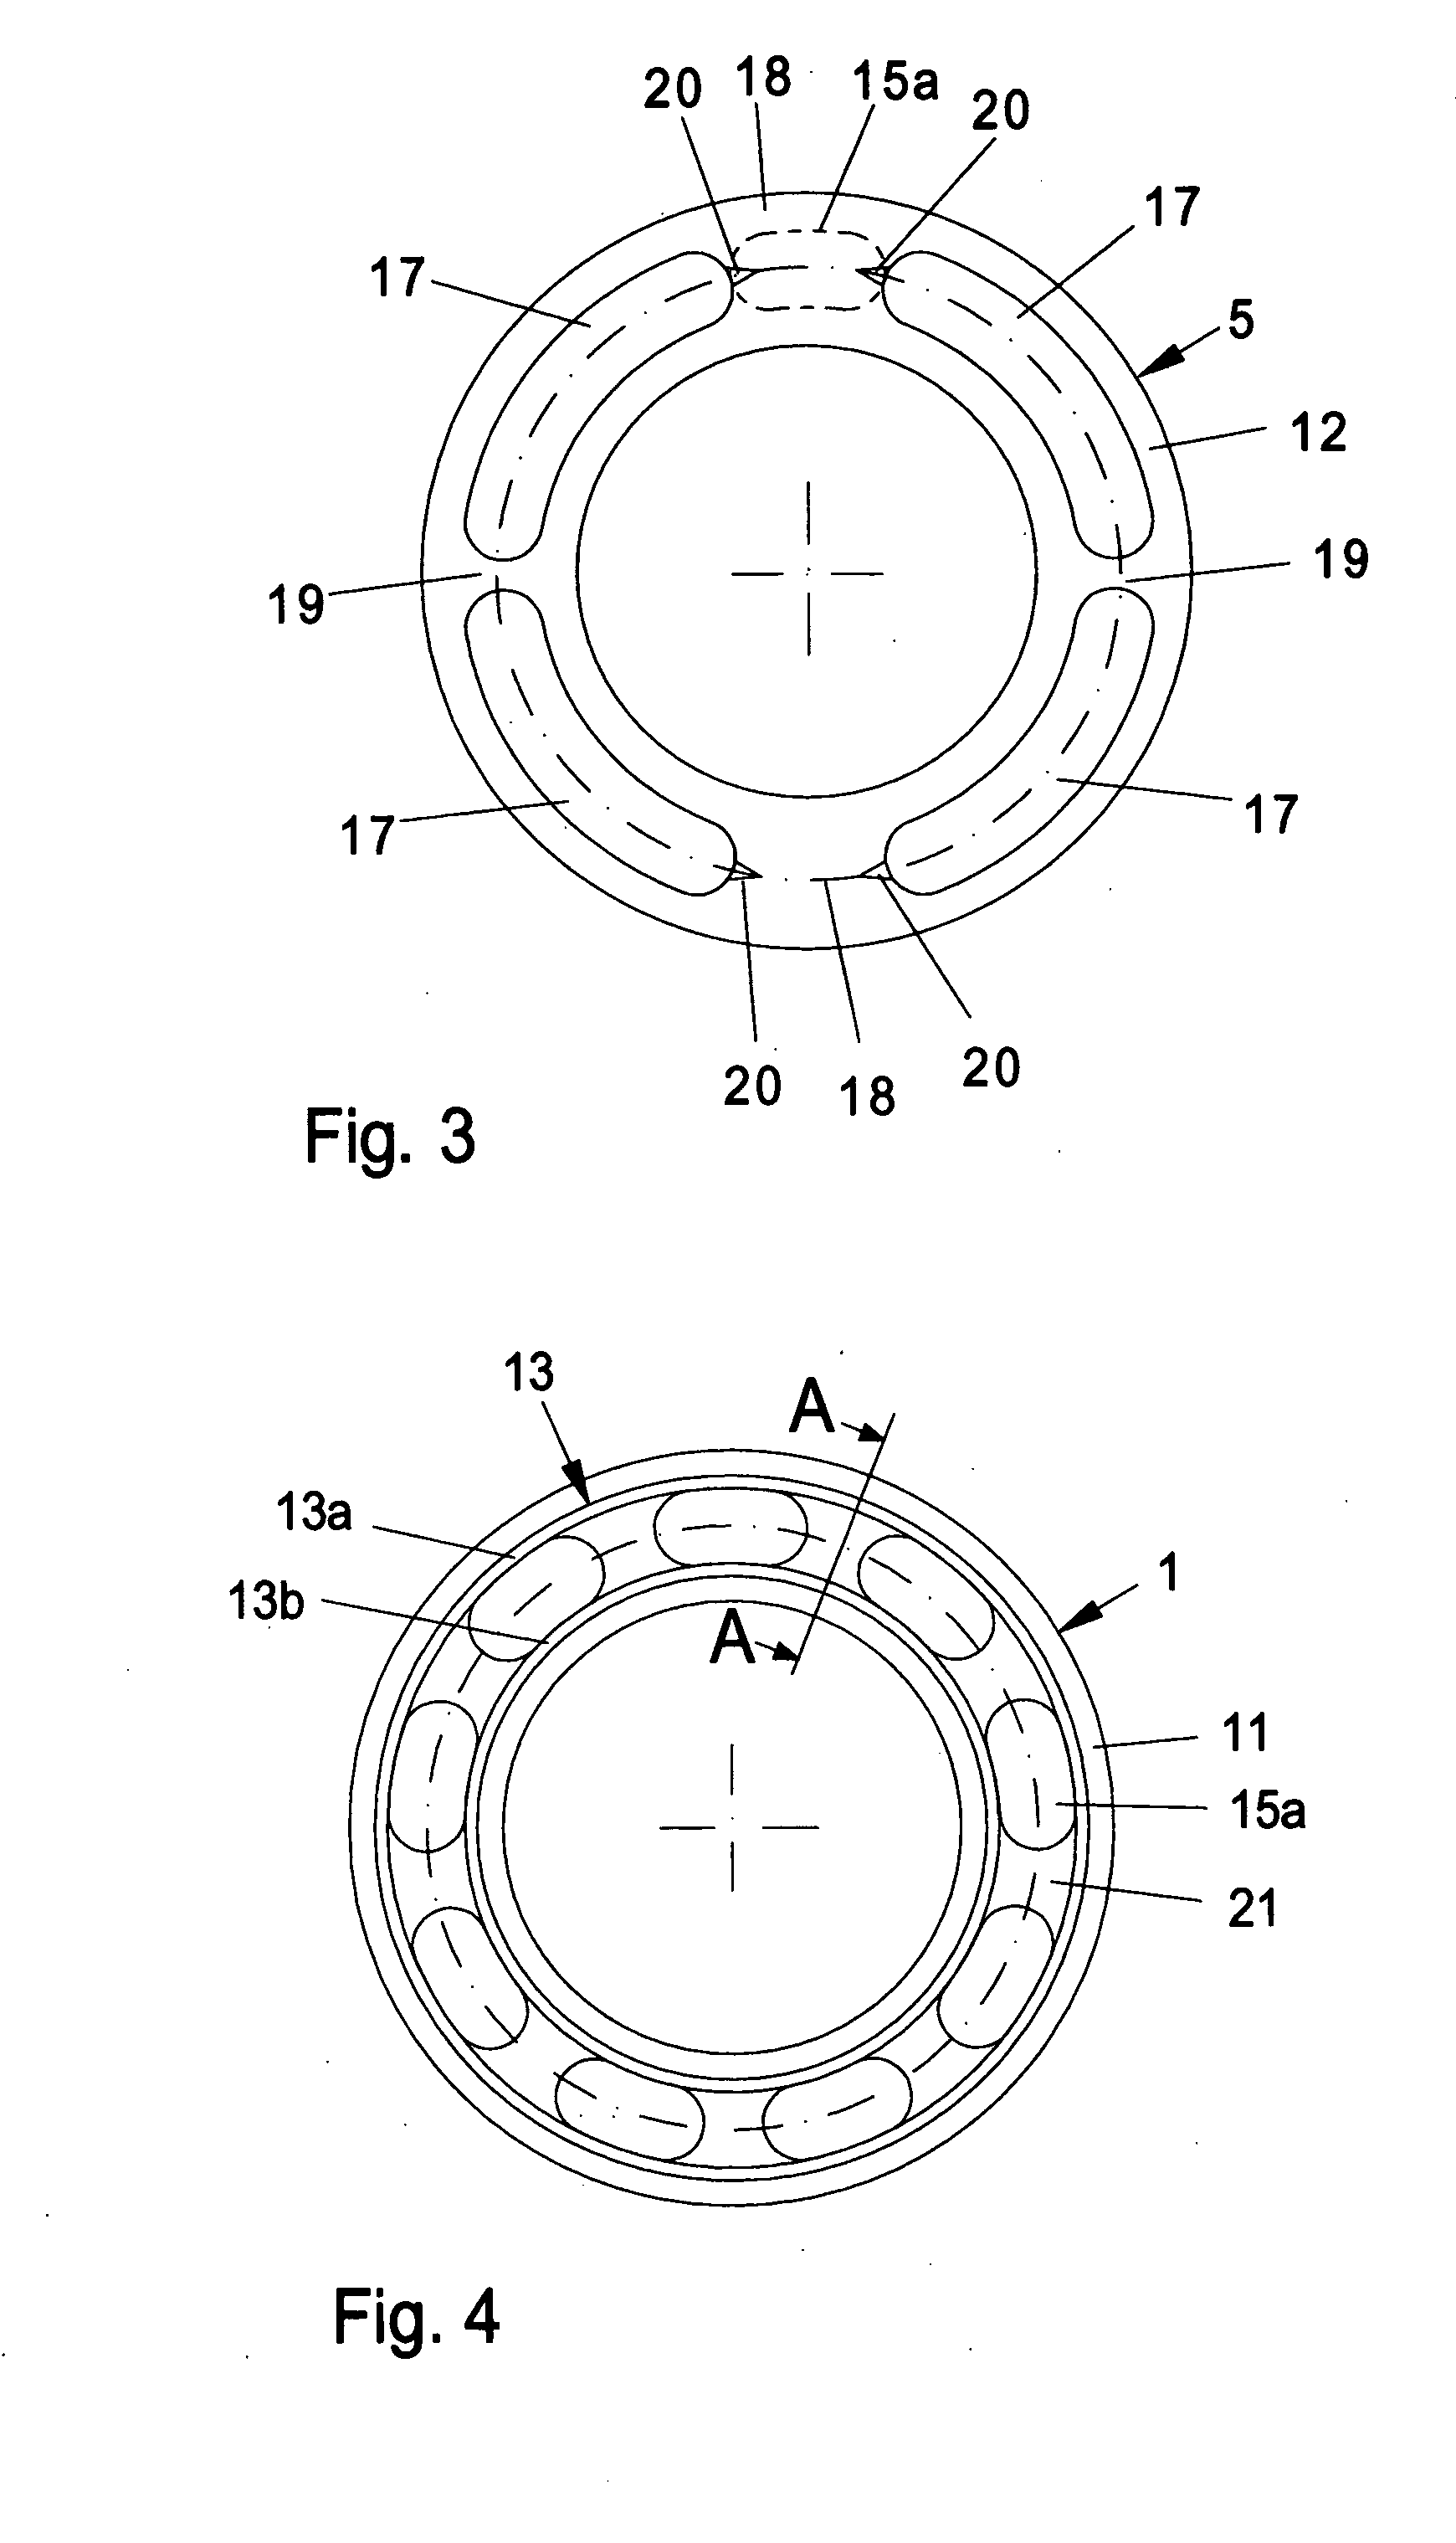 Axial-piston machine of the swashplate or oblique-axis type of construction